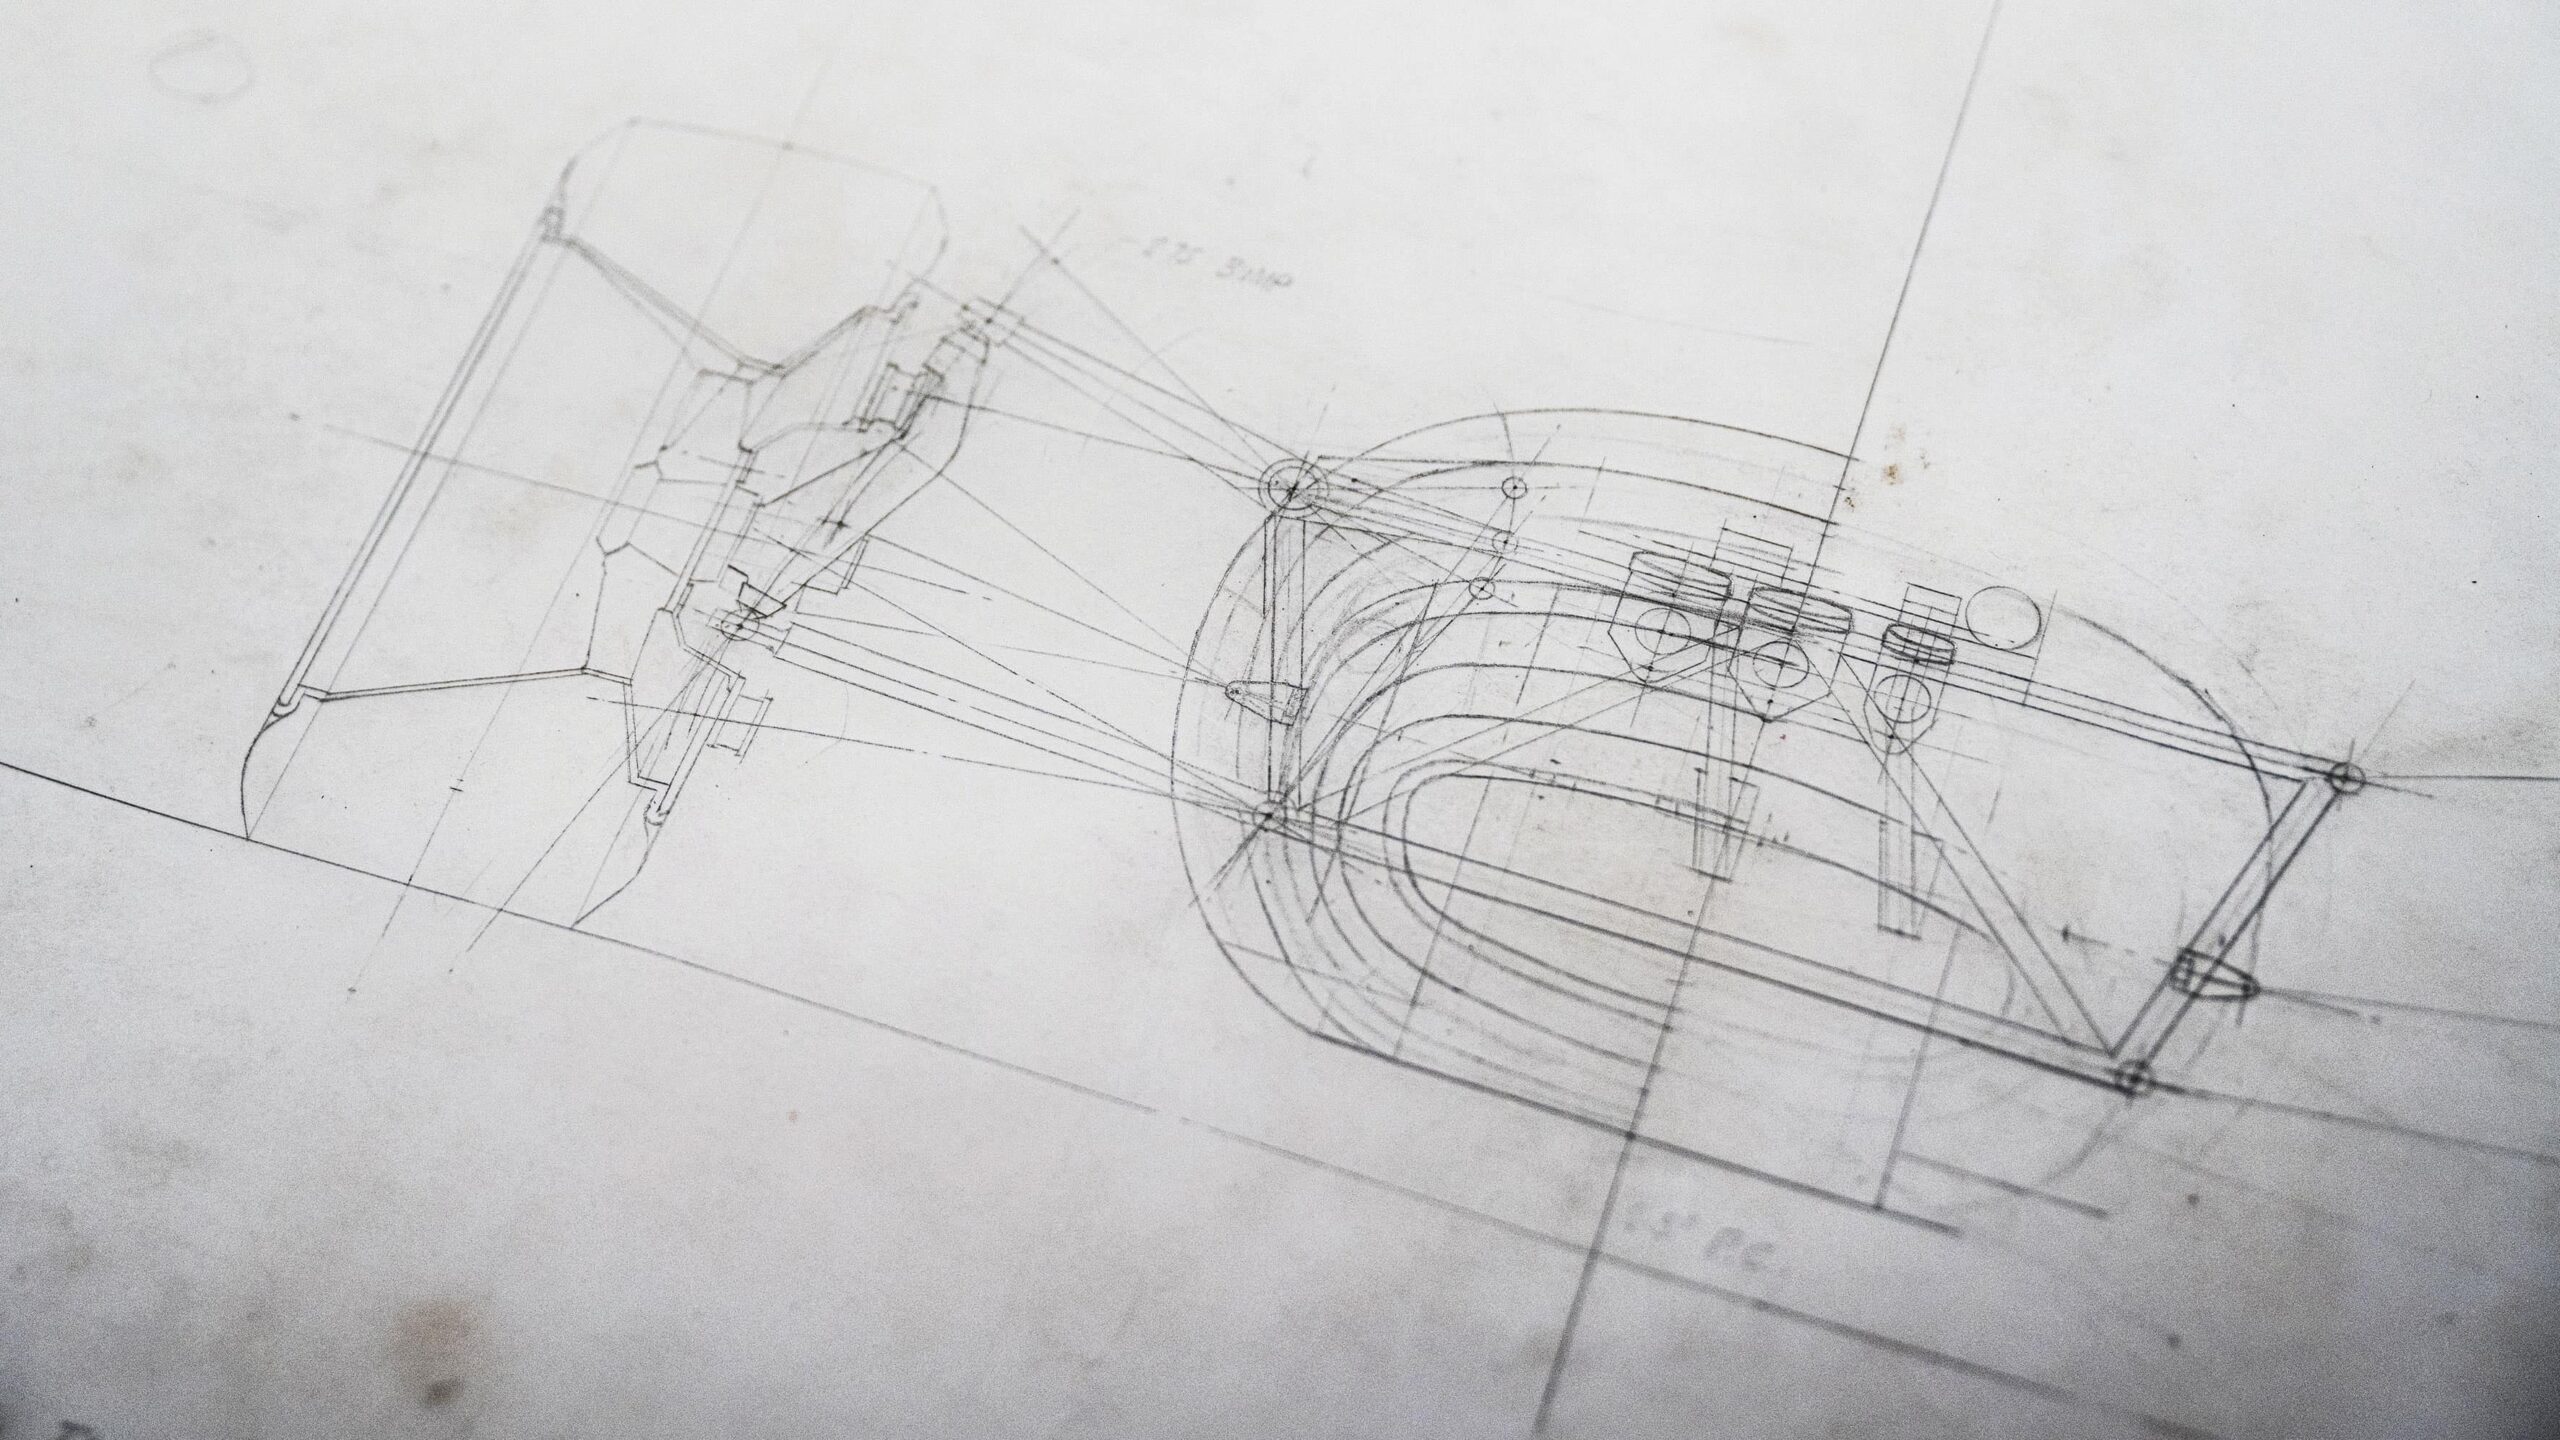 Lotus 49 drawings and sketches